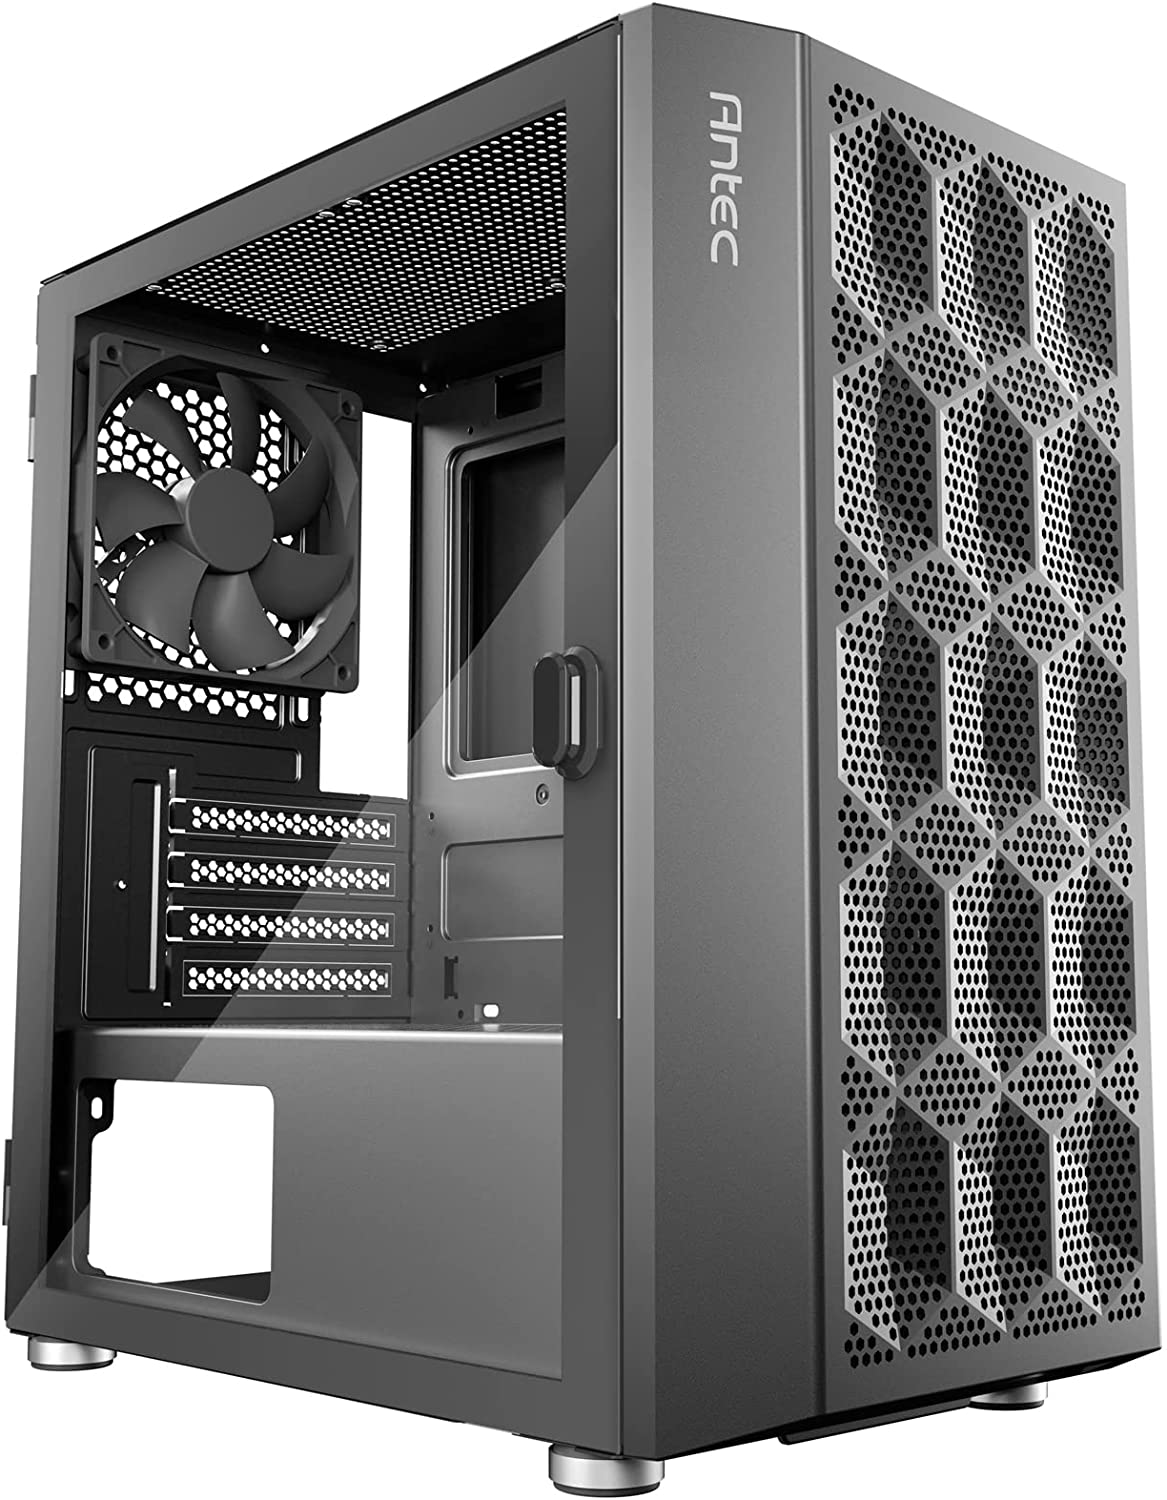 Antec NX200 M, Micro-ATX Tower, Mini-Tower Computer Case with 120mm Rear Fan Pre-Installed, Mesh Design in Front Panel Ventilated Airflow, NX Series, Black, (CJ11132623)